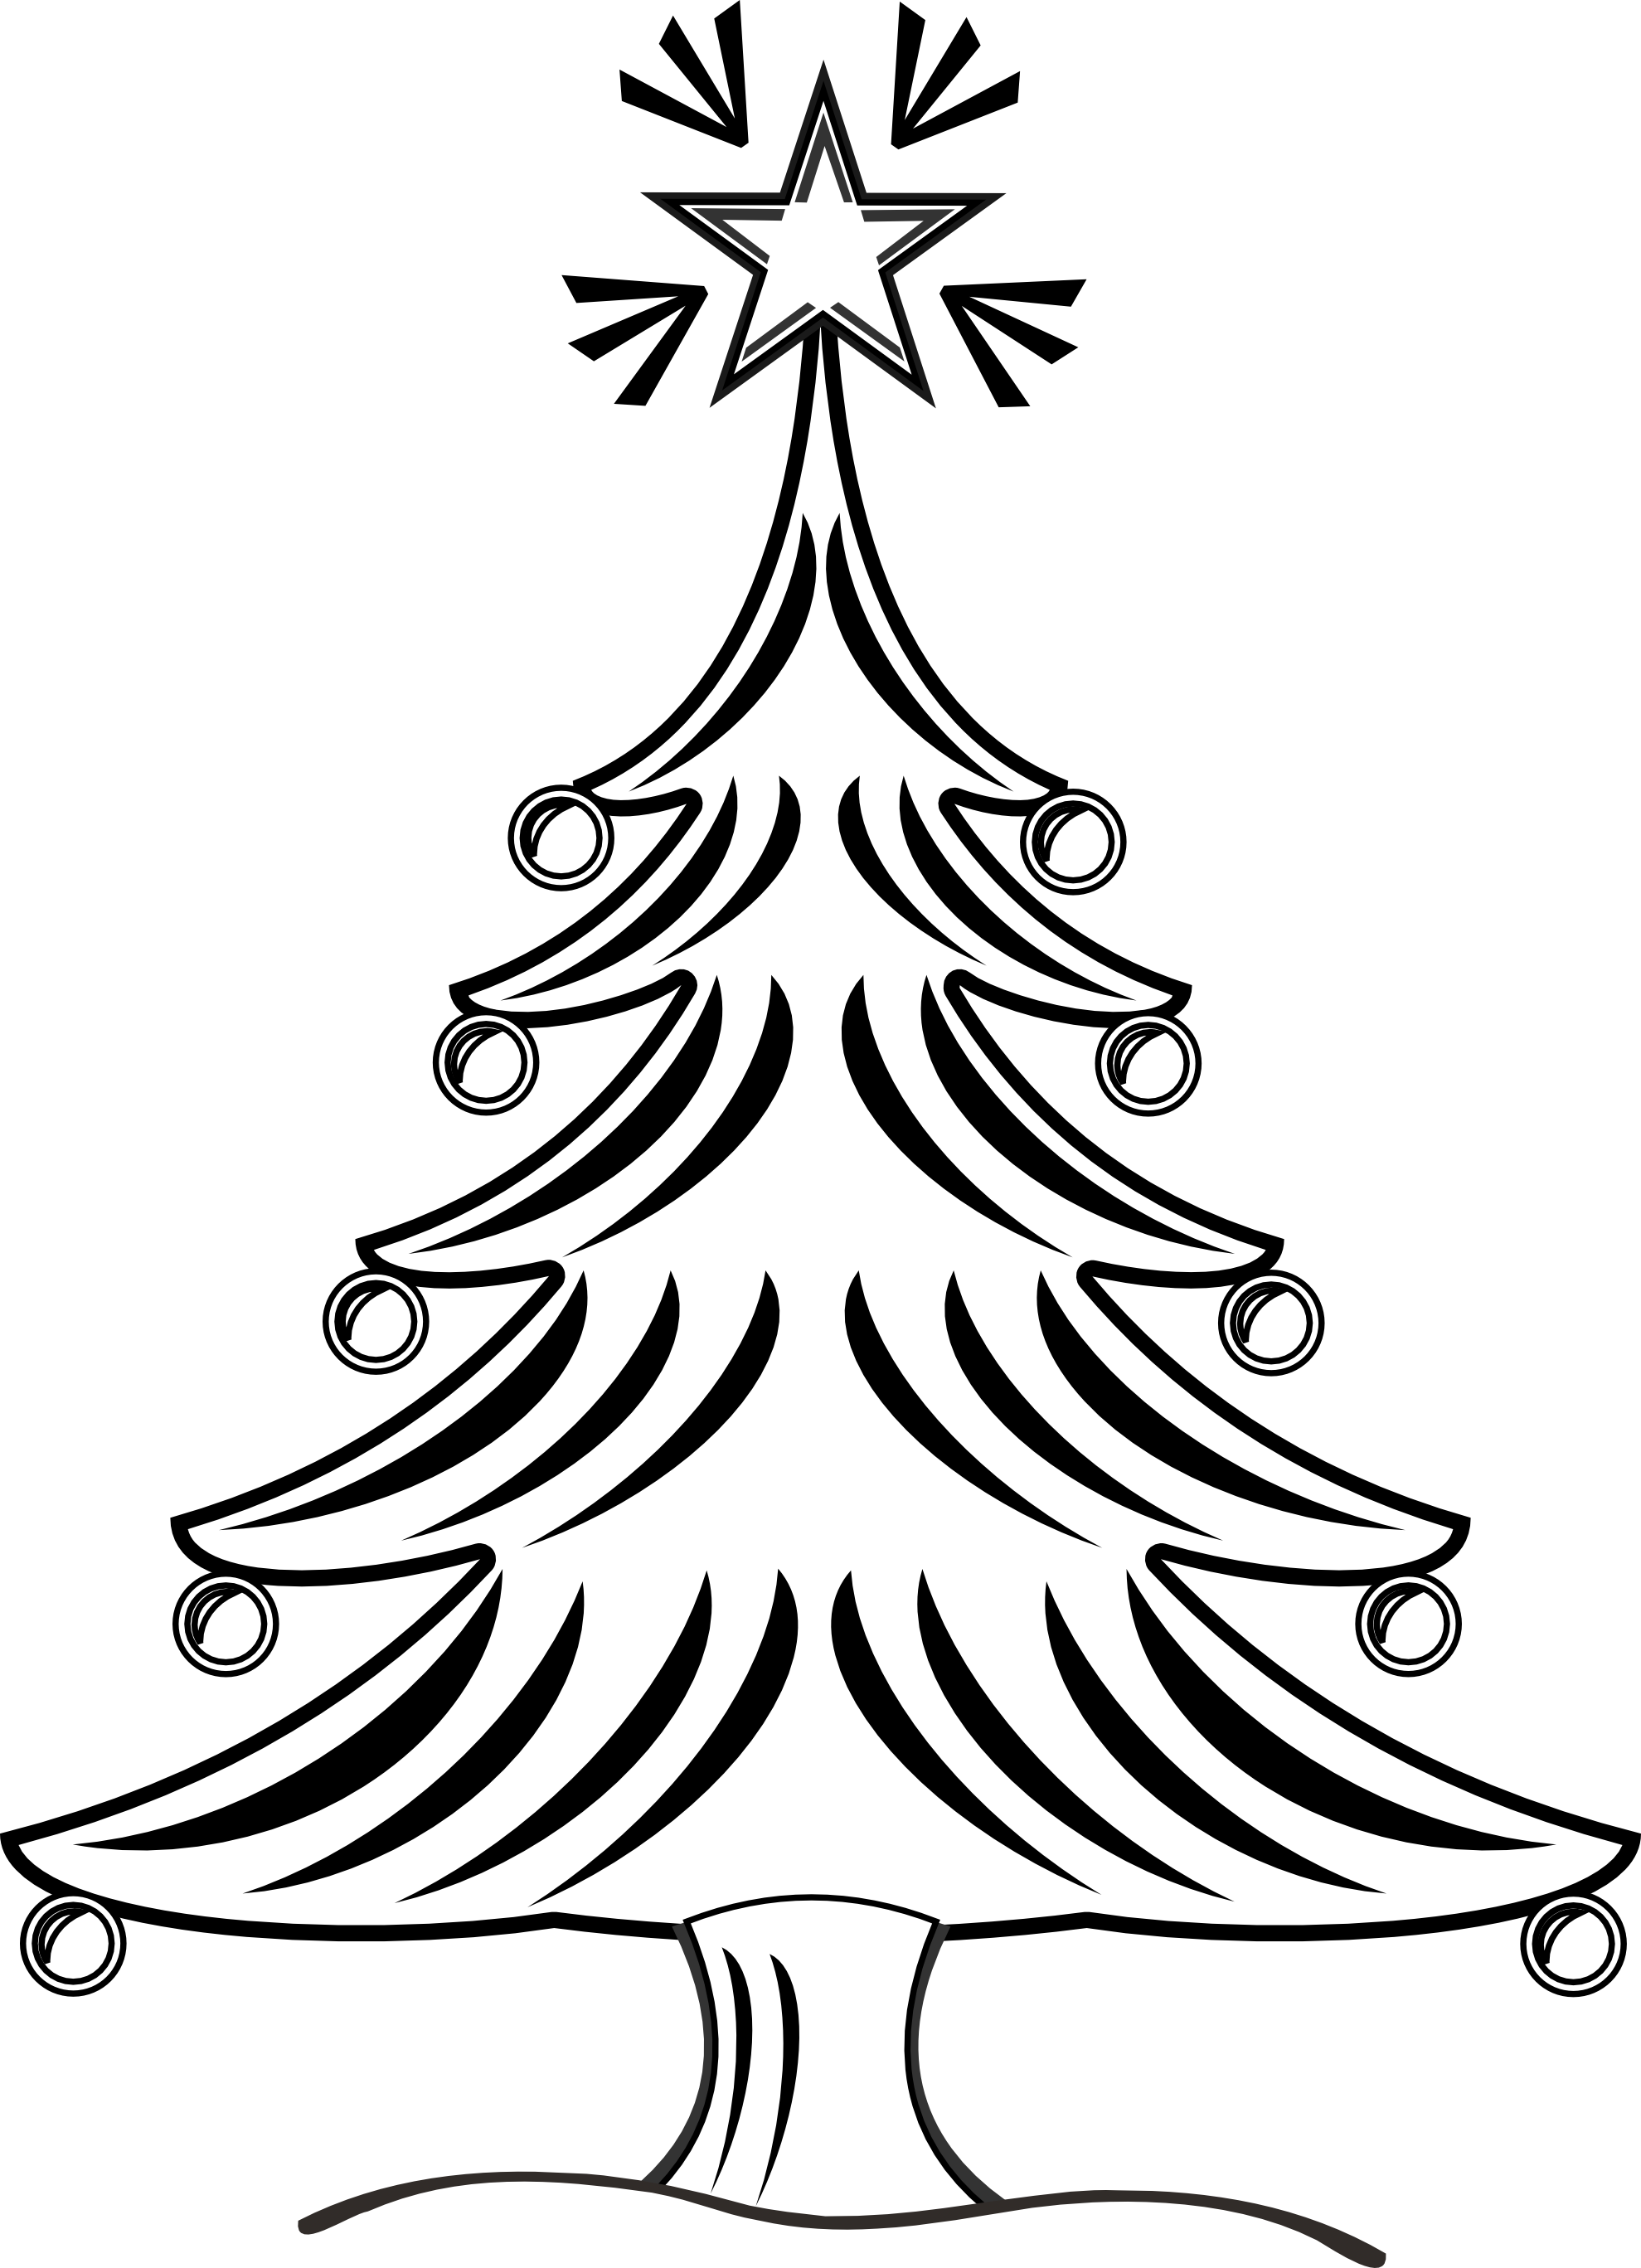 free-black-and-white-tree-images-download-free-black-and-white-tree